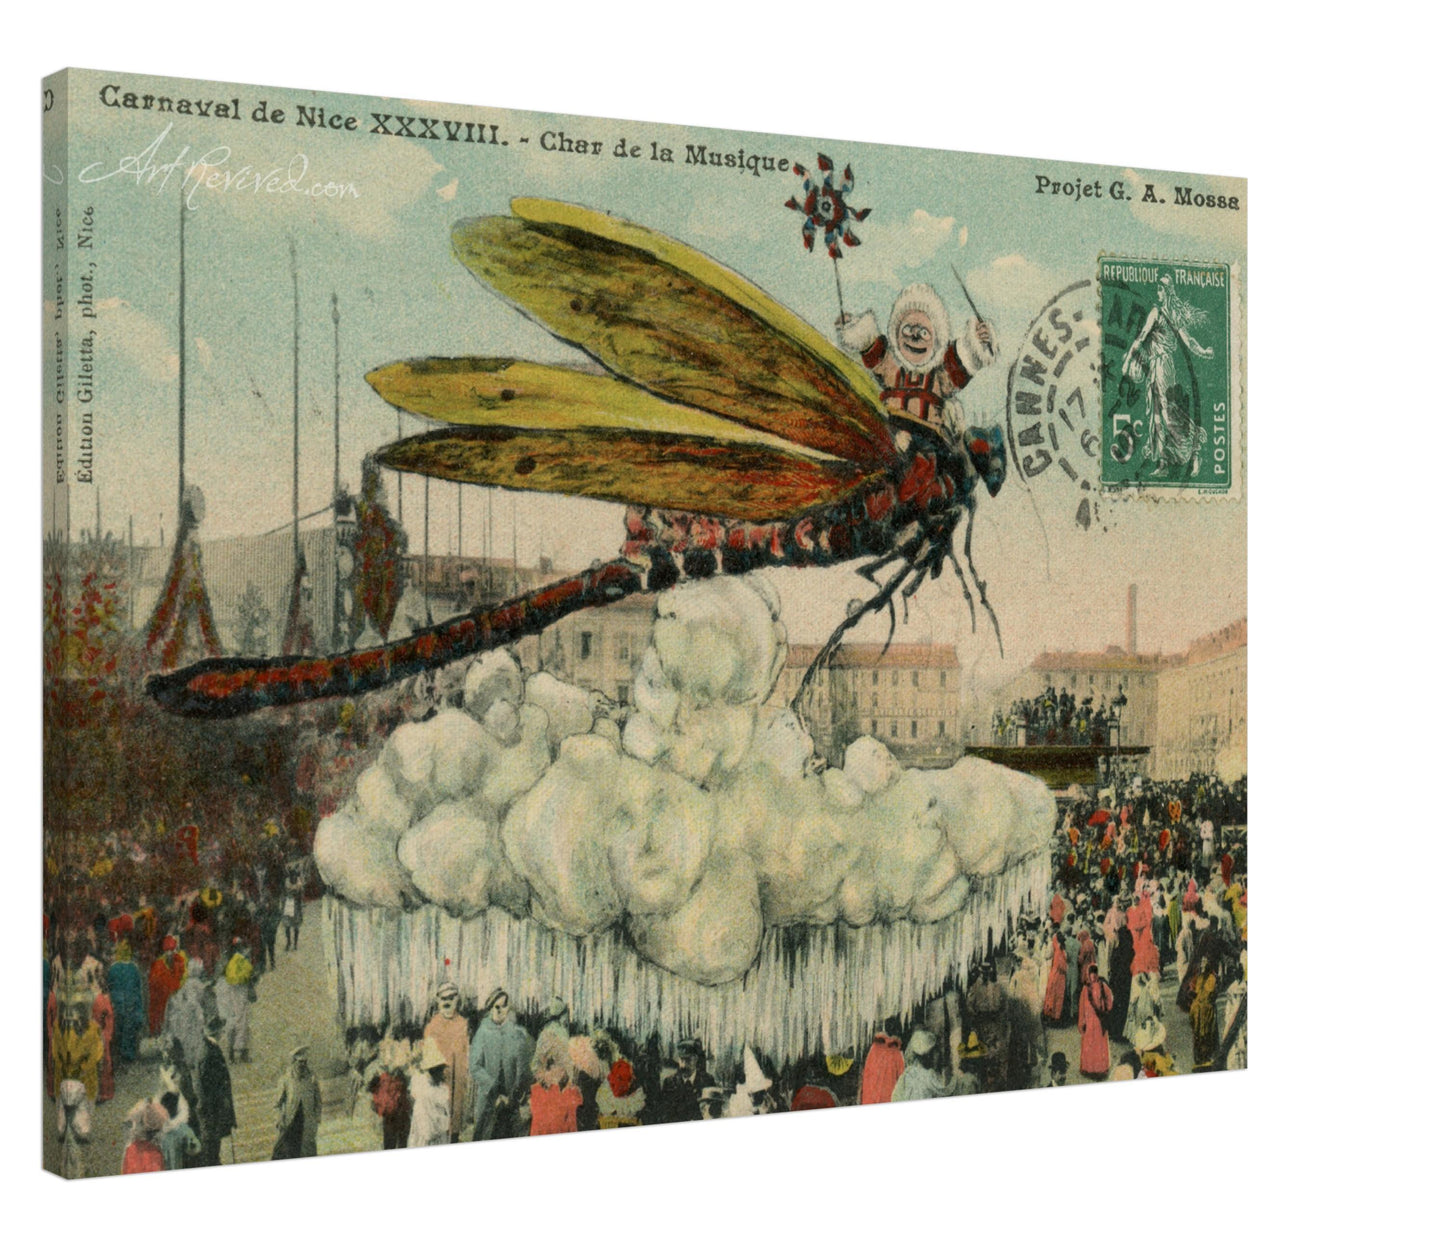 38th Carnaval Dragonfly